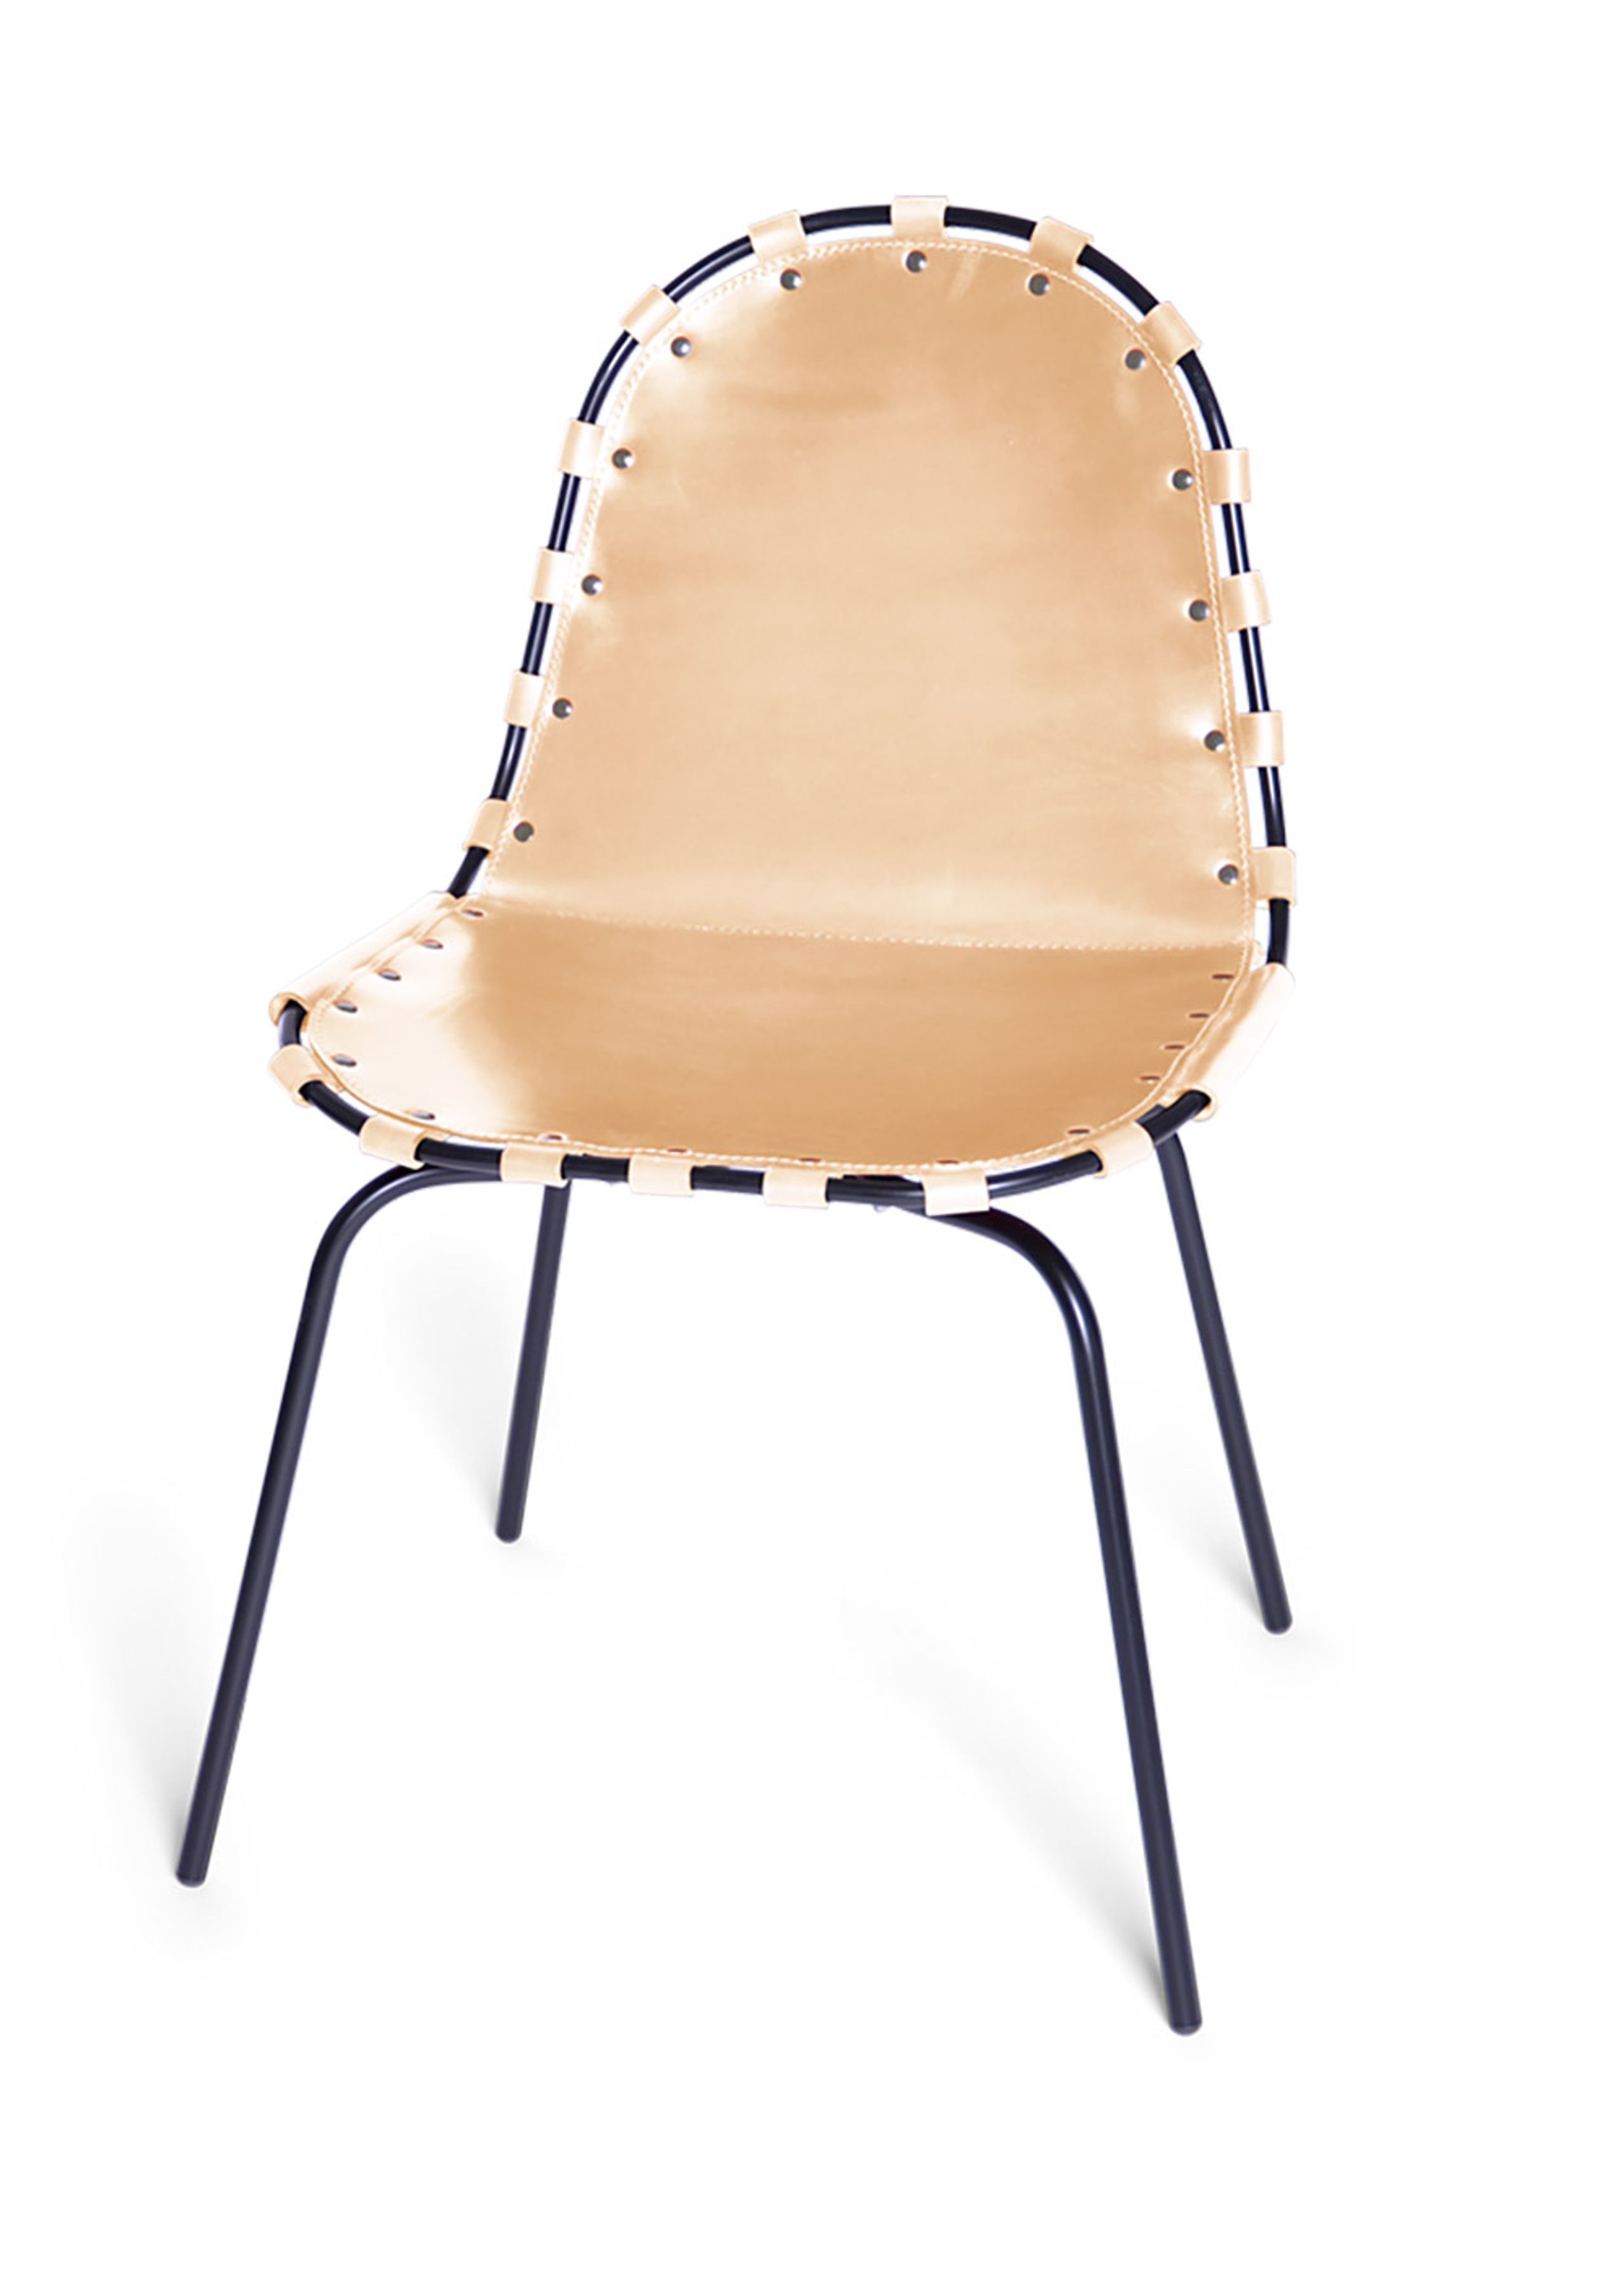 OX DENMARQ - Cadeira - STRETCH Chair - Natural Leather / Black Steel